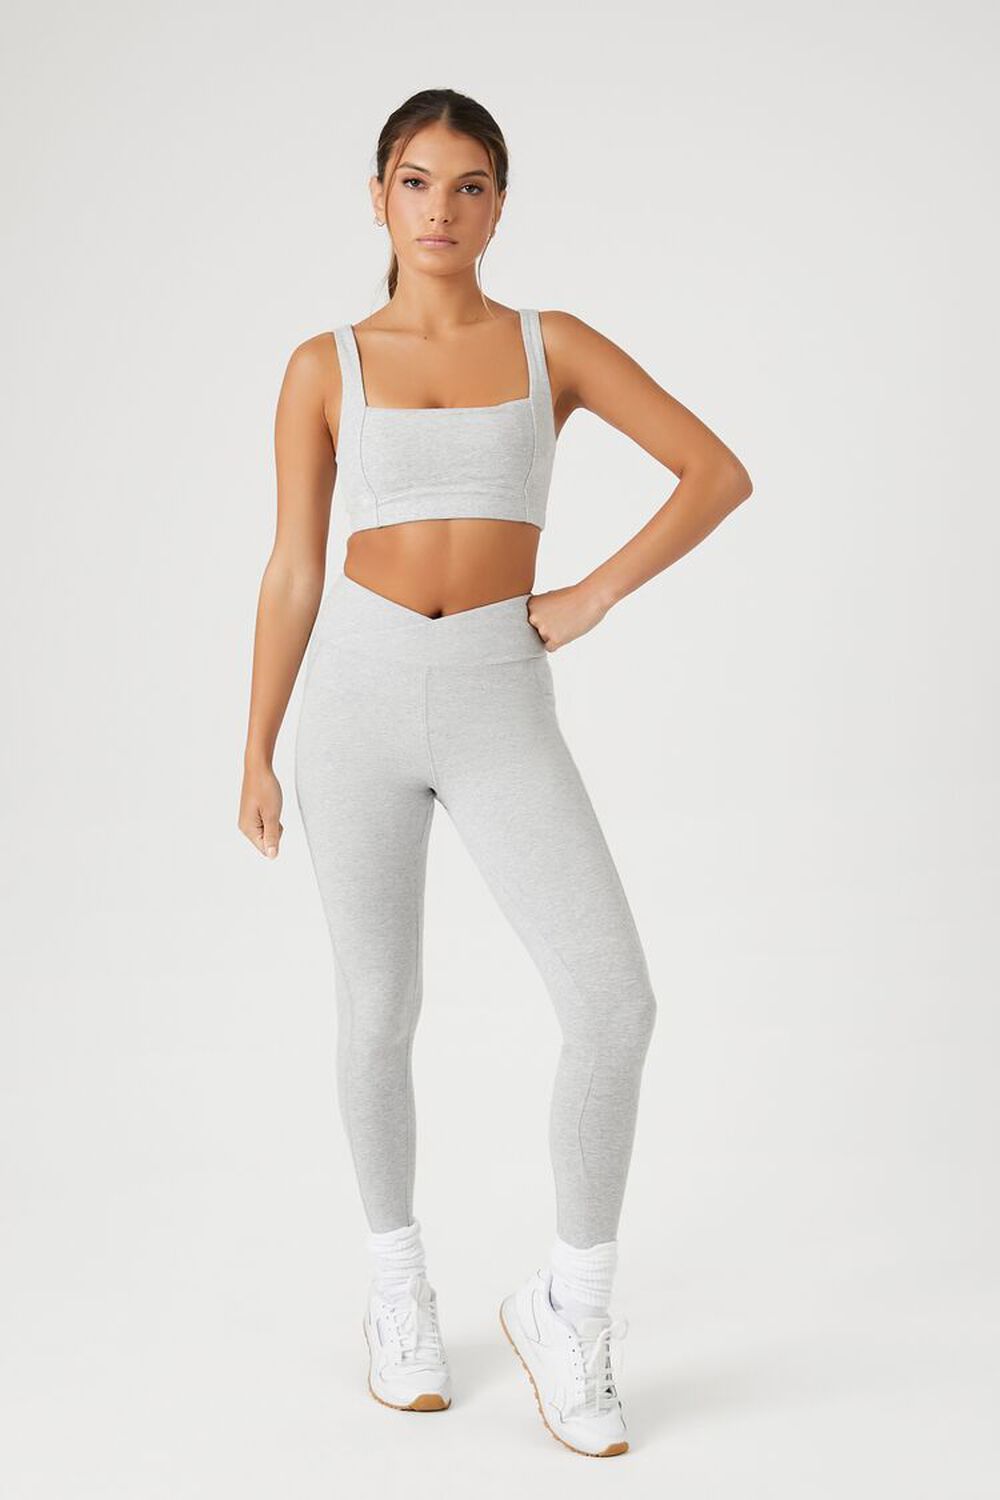 Forever 21 Women's Active Seamless High-Rise Leggings in Heather